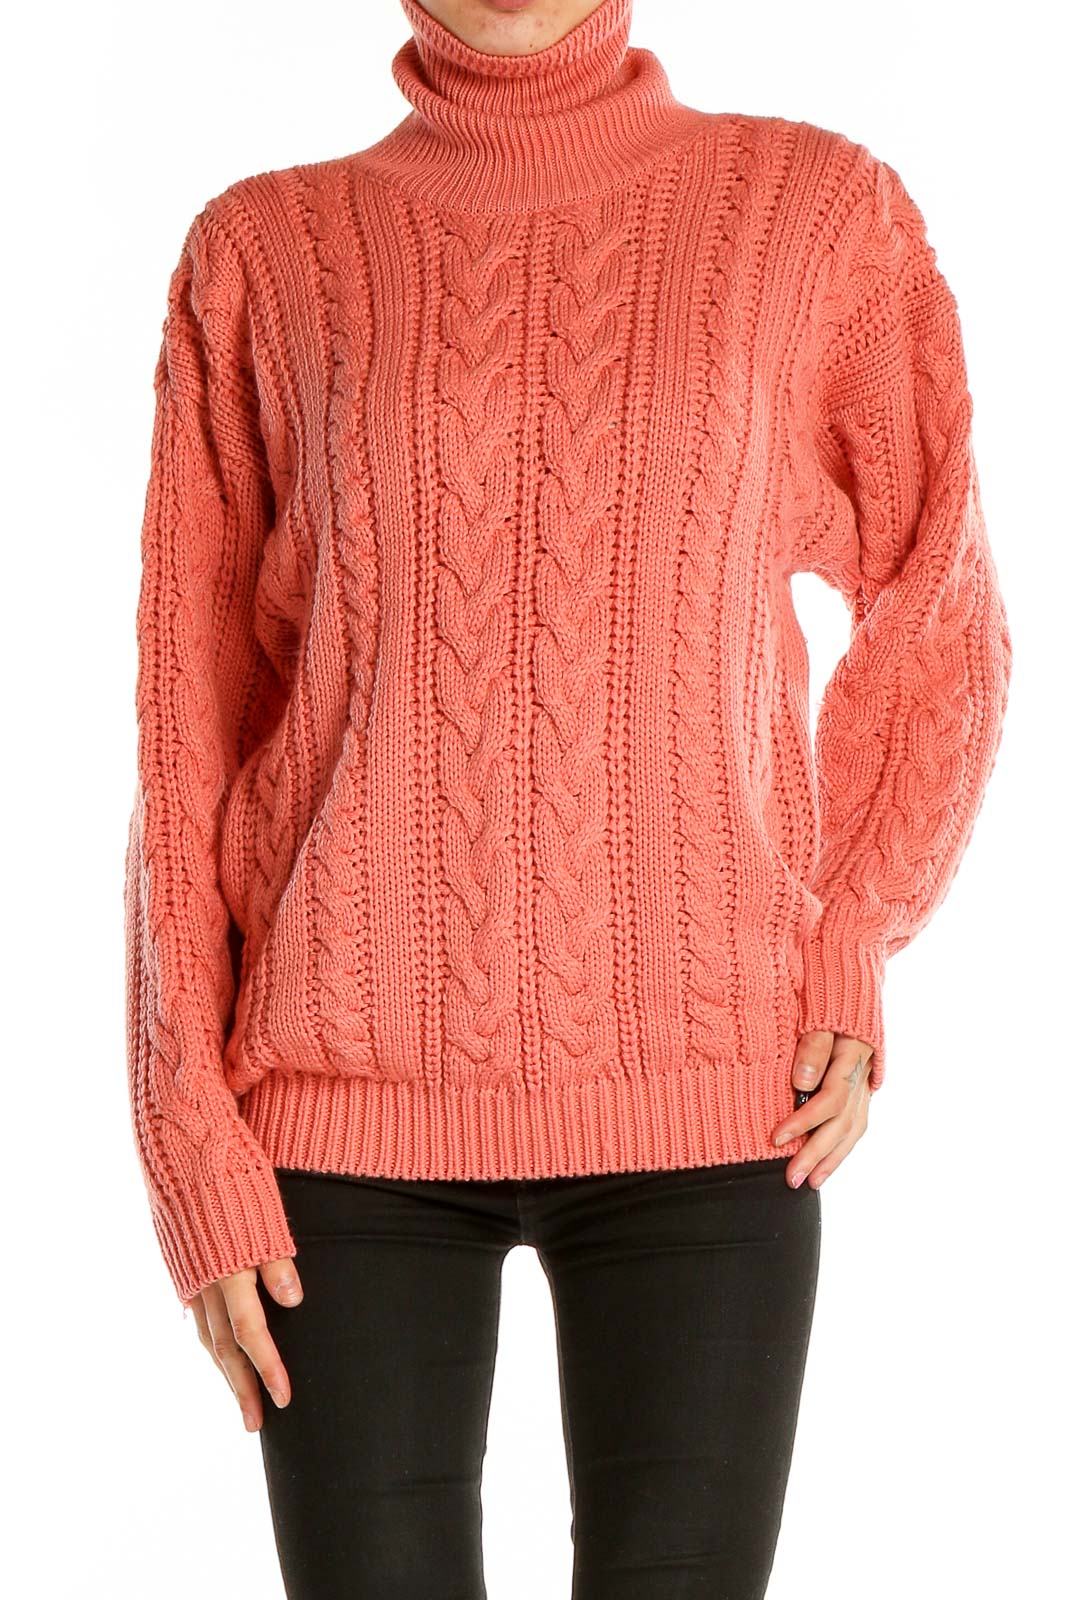 Pink Retro Sweater Front